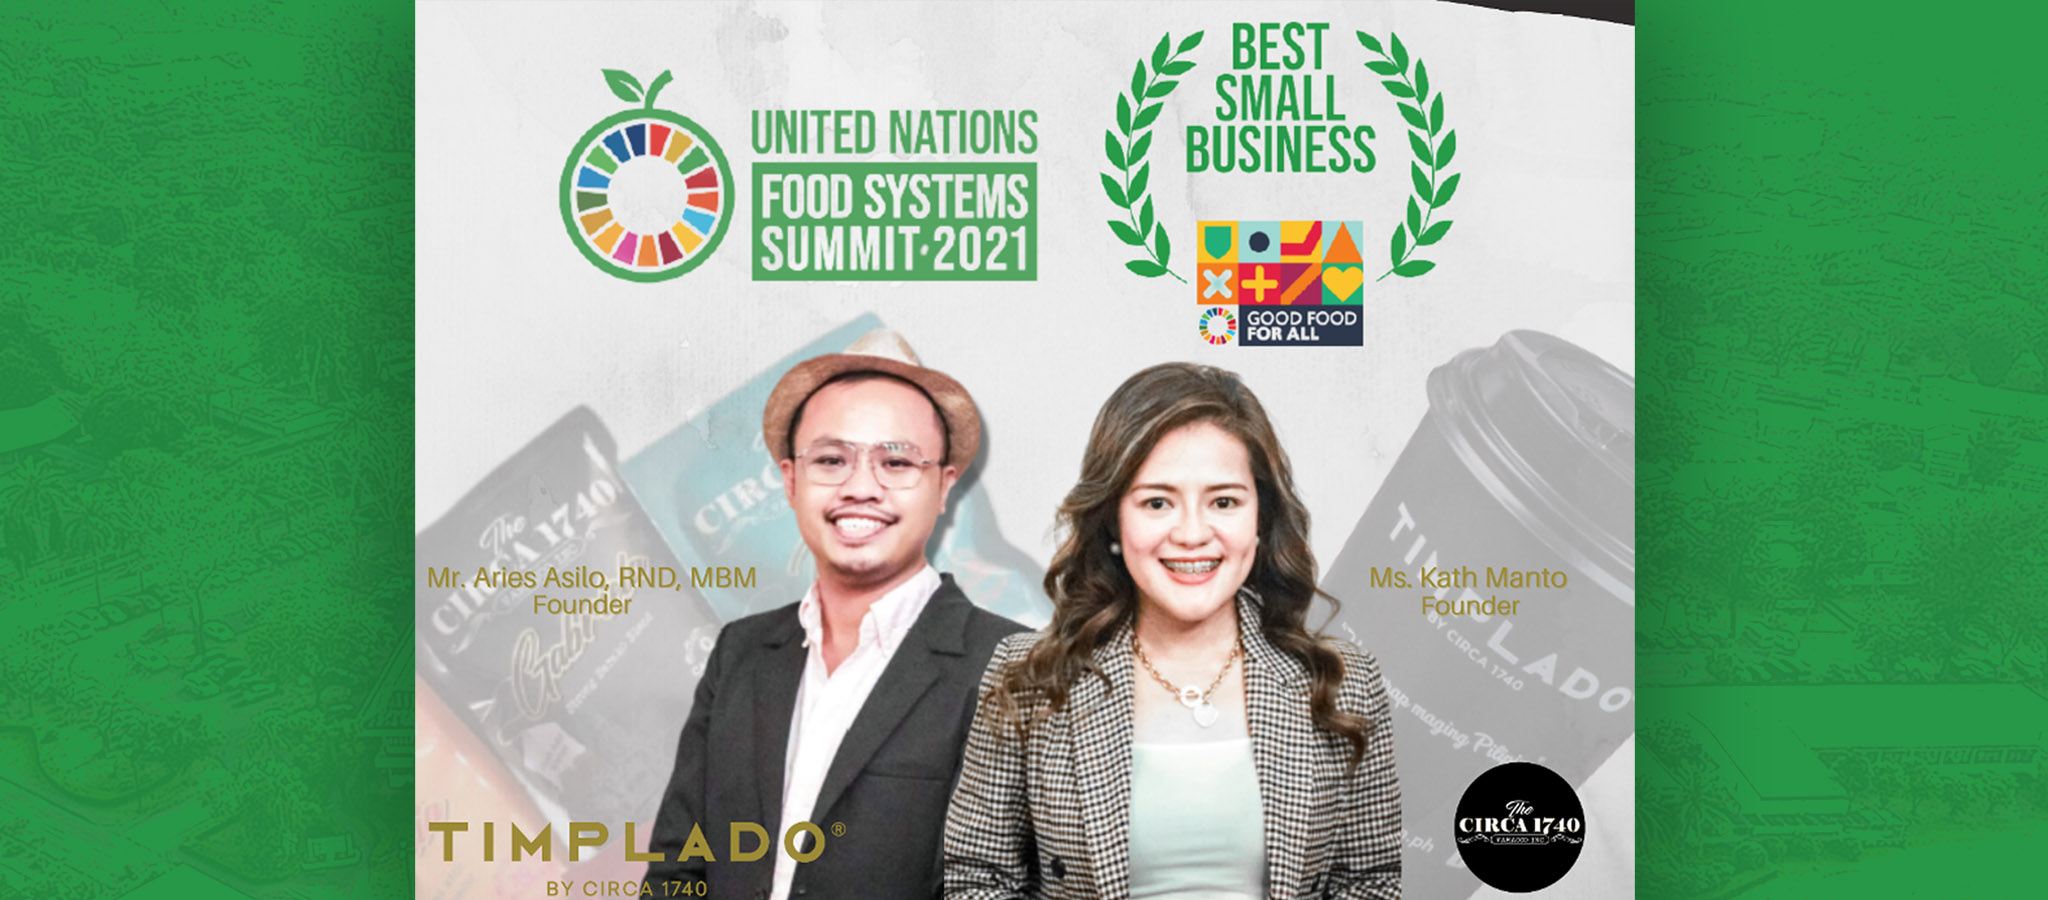 UPLB alumnus and team win the UN Best Small Business 2021